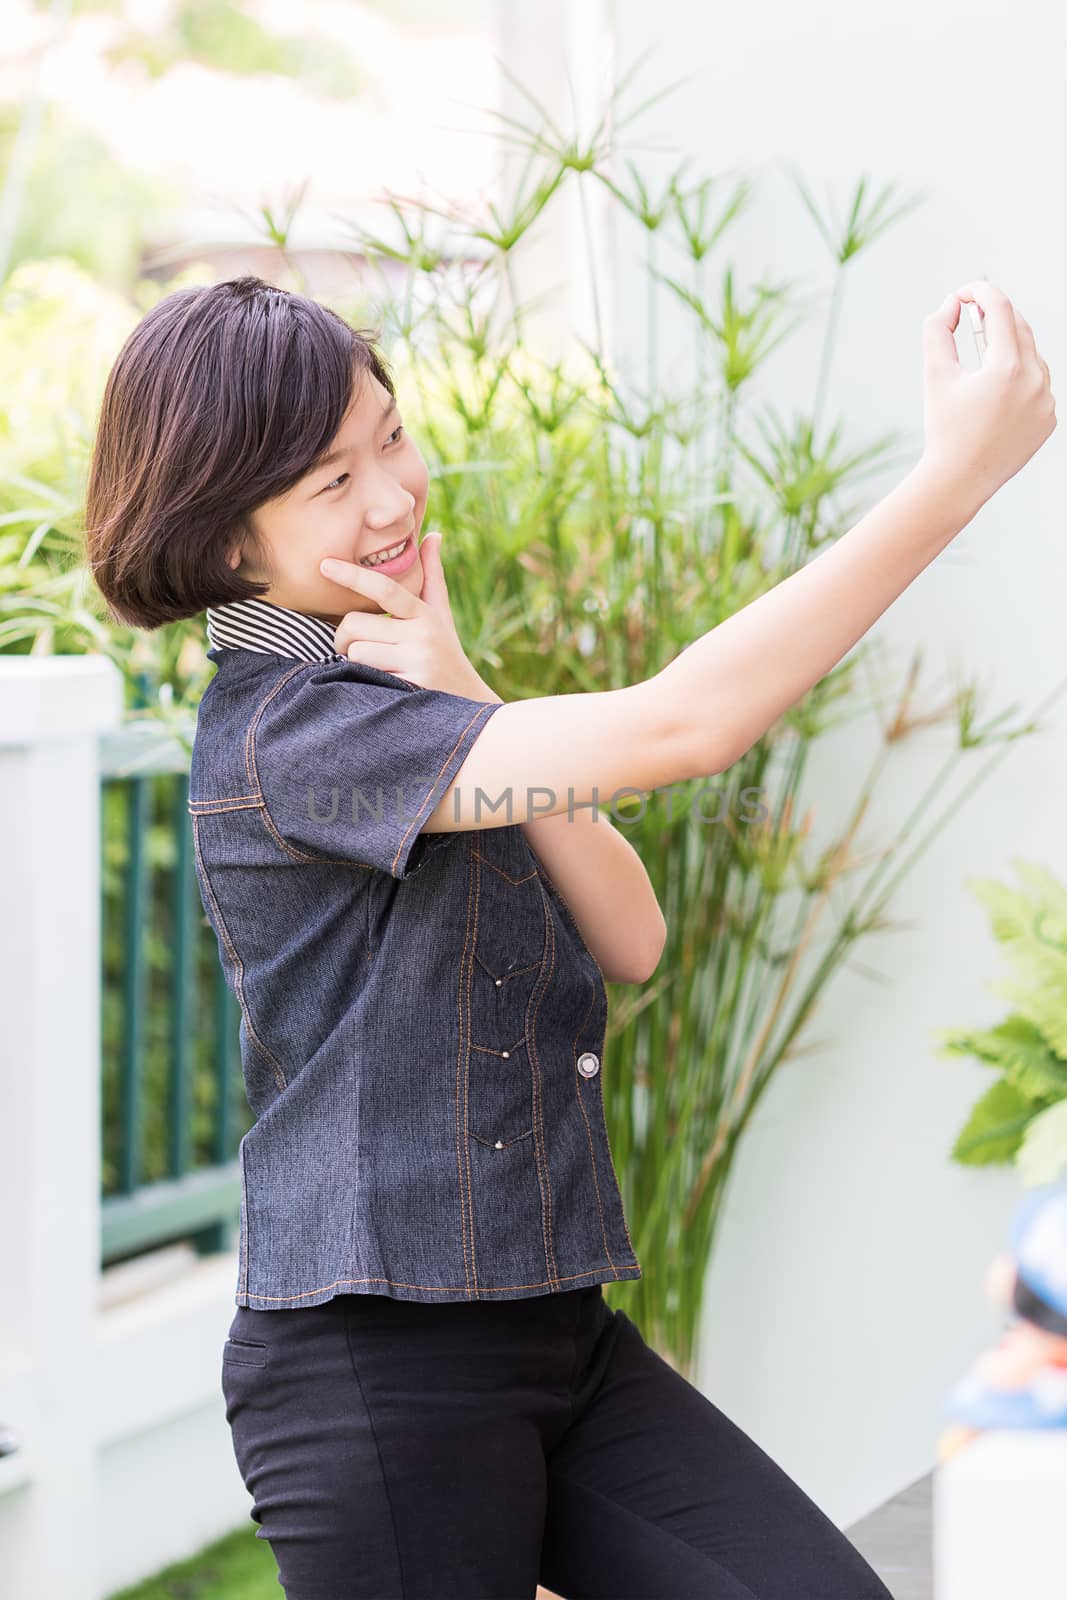 Asian girl with short hair using mobile phone to take selfie outdoor in garden